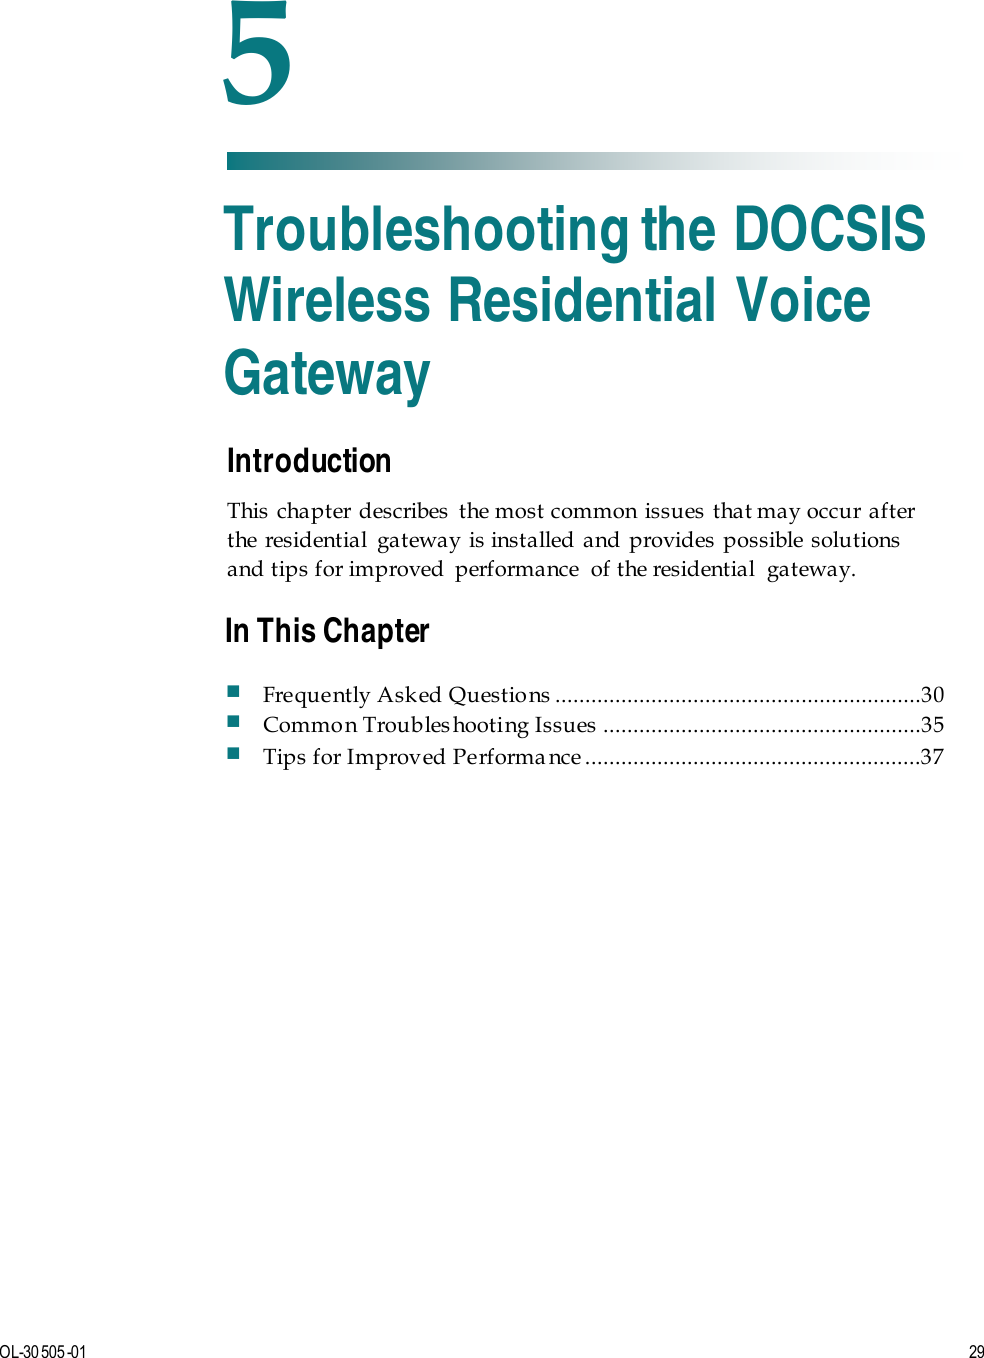   OL-30 505-01  29  Introduction This chapter describes the most common issues that may occur after the residential gateway is installed and provides possible solutions and tips for improved  performance  of the residential  gateway.    5 Chapter 5 Troubleshooting the DOCSIS Wireless Residential Voice Gateway In This Chapter  Frequently Asked Questio ns  .............................................................30  Common Troubleshooting Issues .....................................................35  Tips for Improved Performa nce ........................................................37 